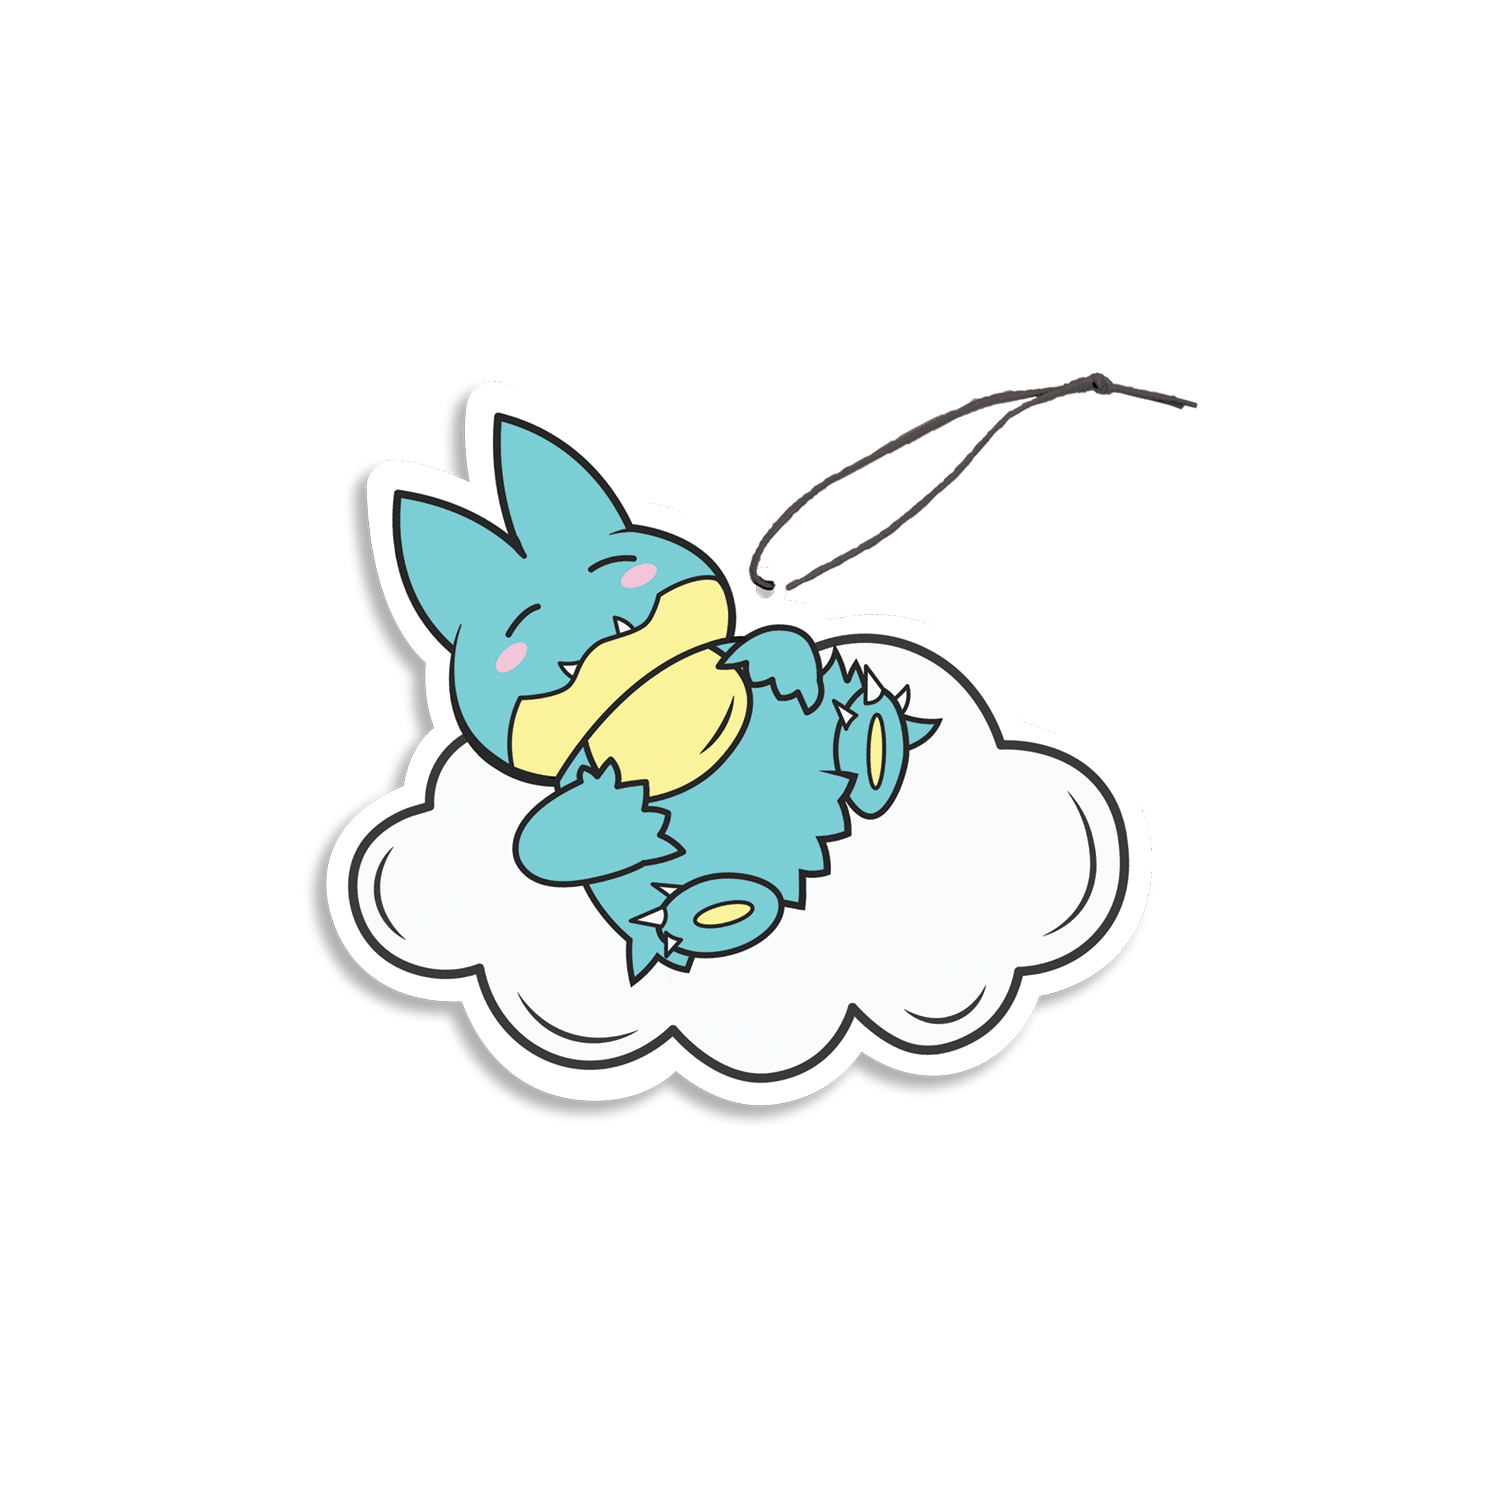 Munchlax Air Freshener design features the Pokemon Snorlax lazily sleeping on a cloud.